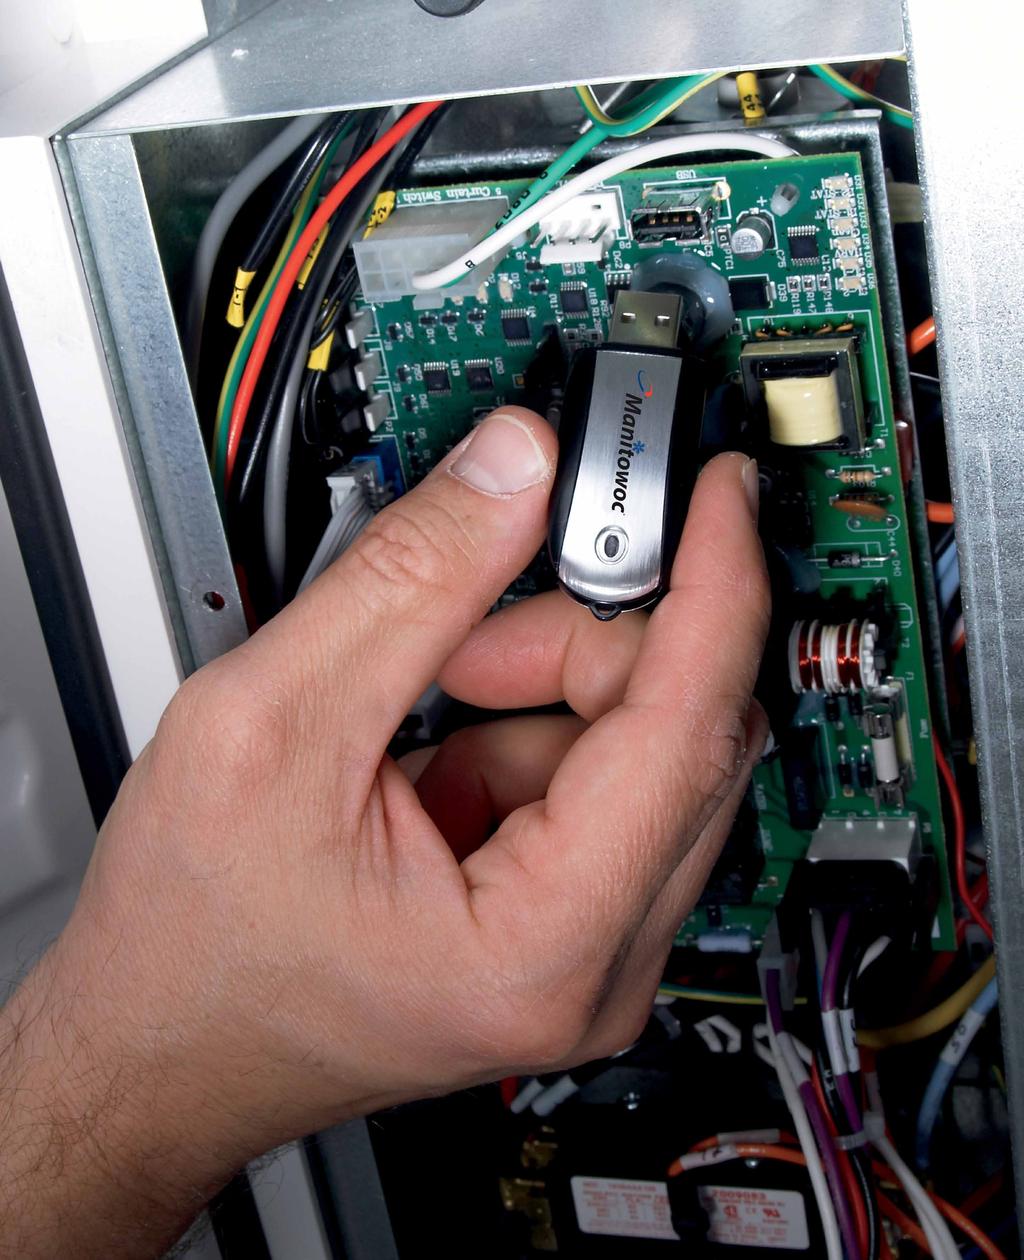 Service diagnostic programs self-check the control board and other components to prevent unnecessary part replacement.